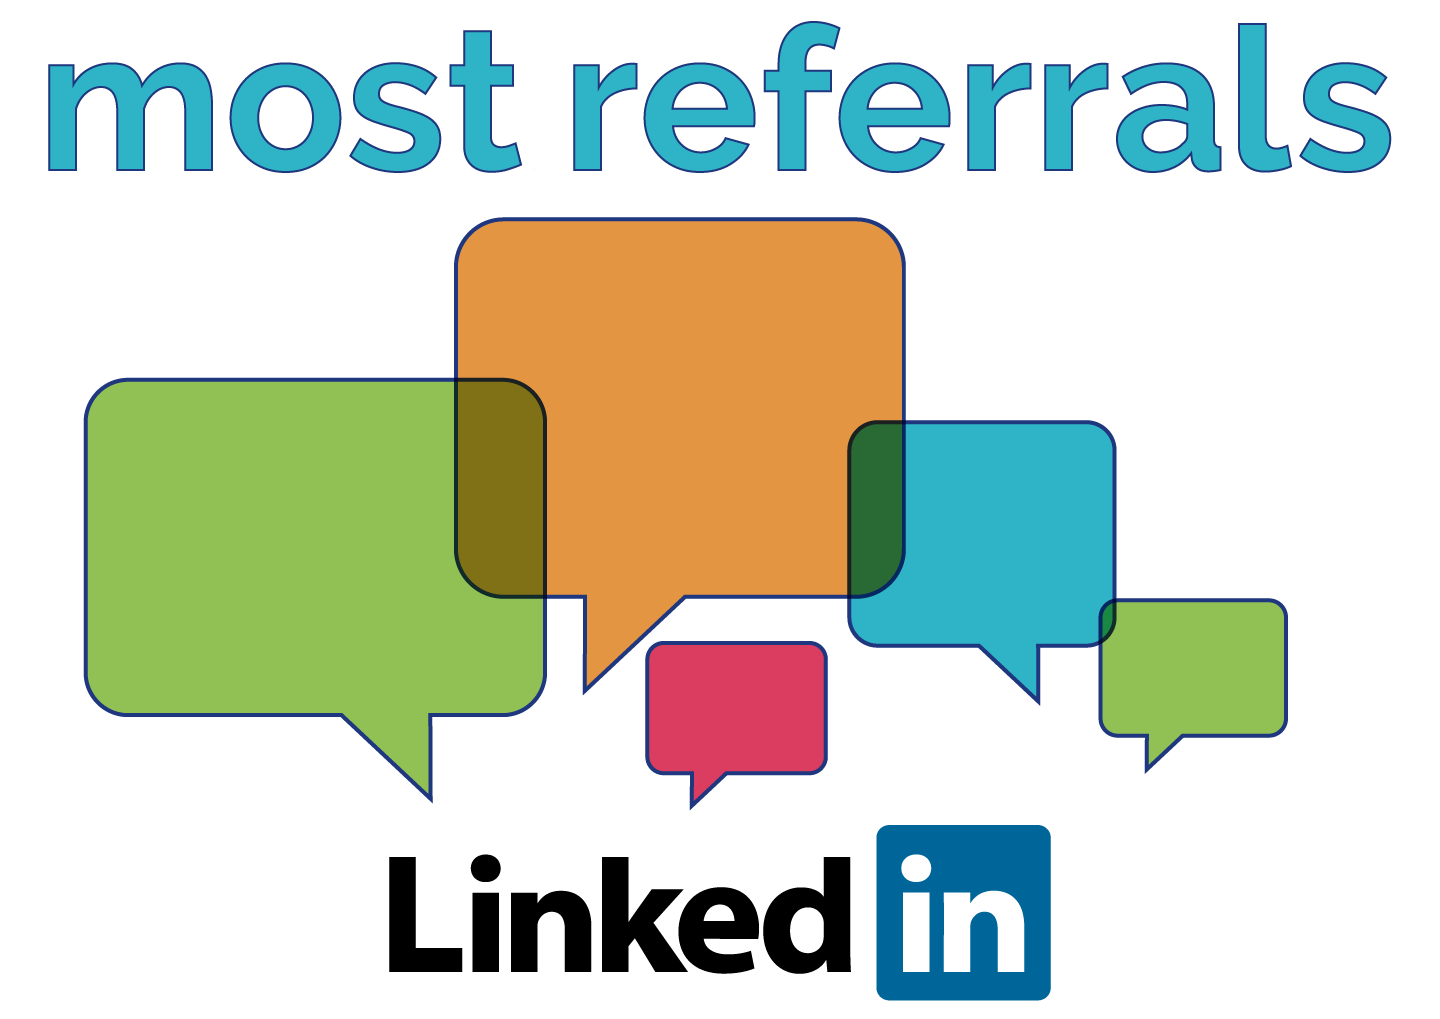 "Most referrals" with chat bubble icons and Linkedin logo